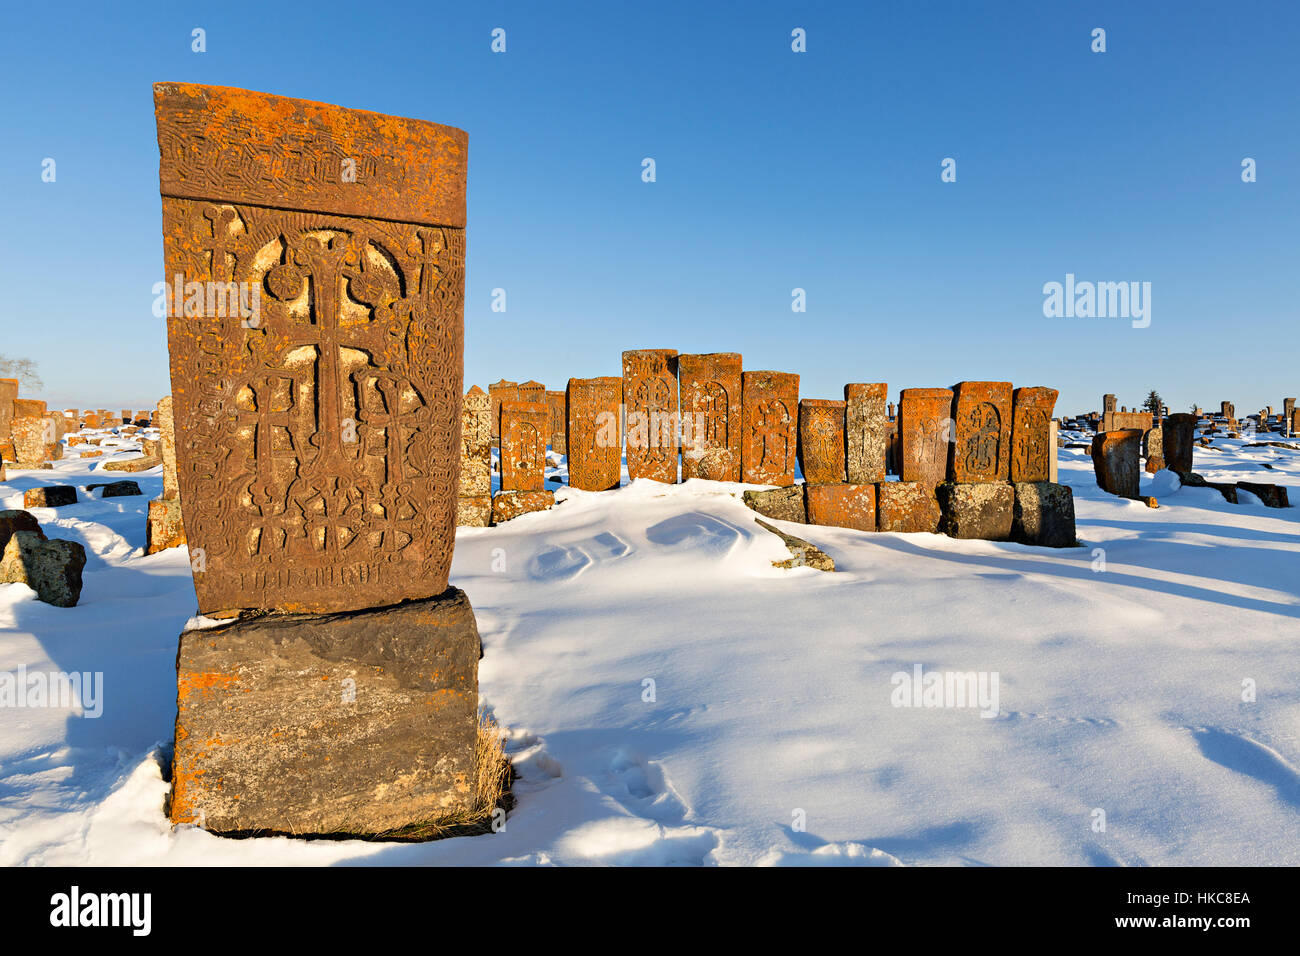 Headstones known as Khachkars in the historical cemetery of Noratus in Armenia Stock Photo